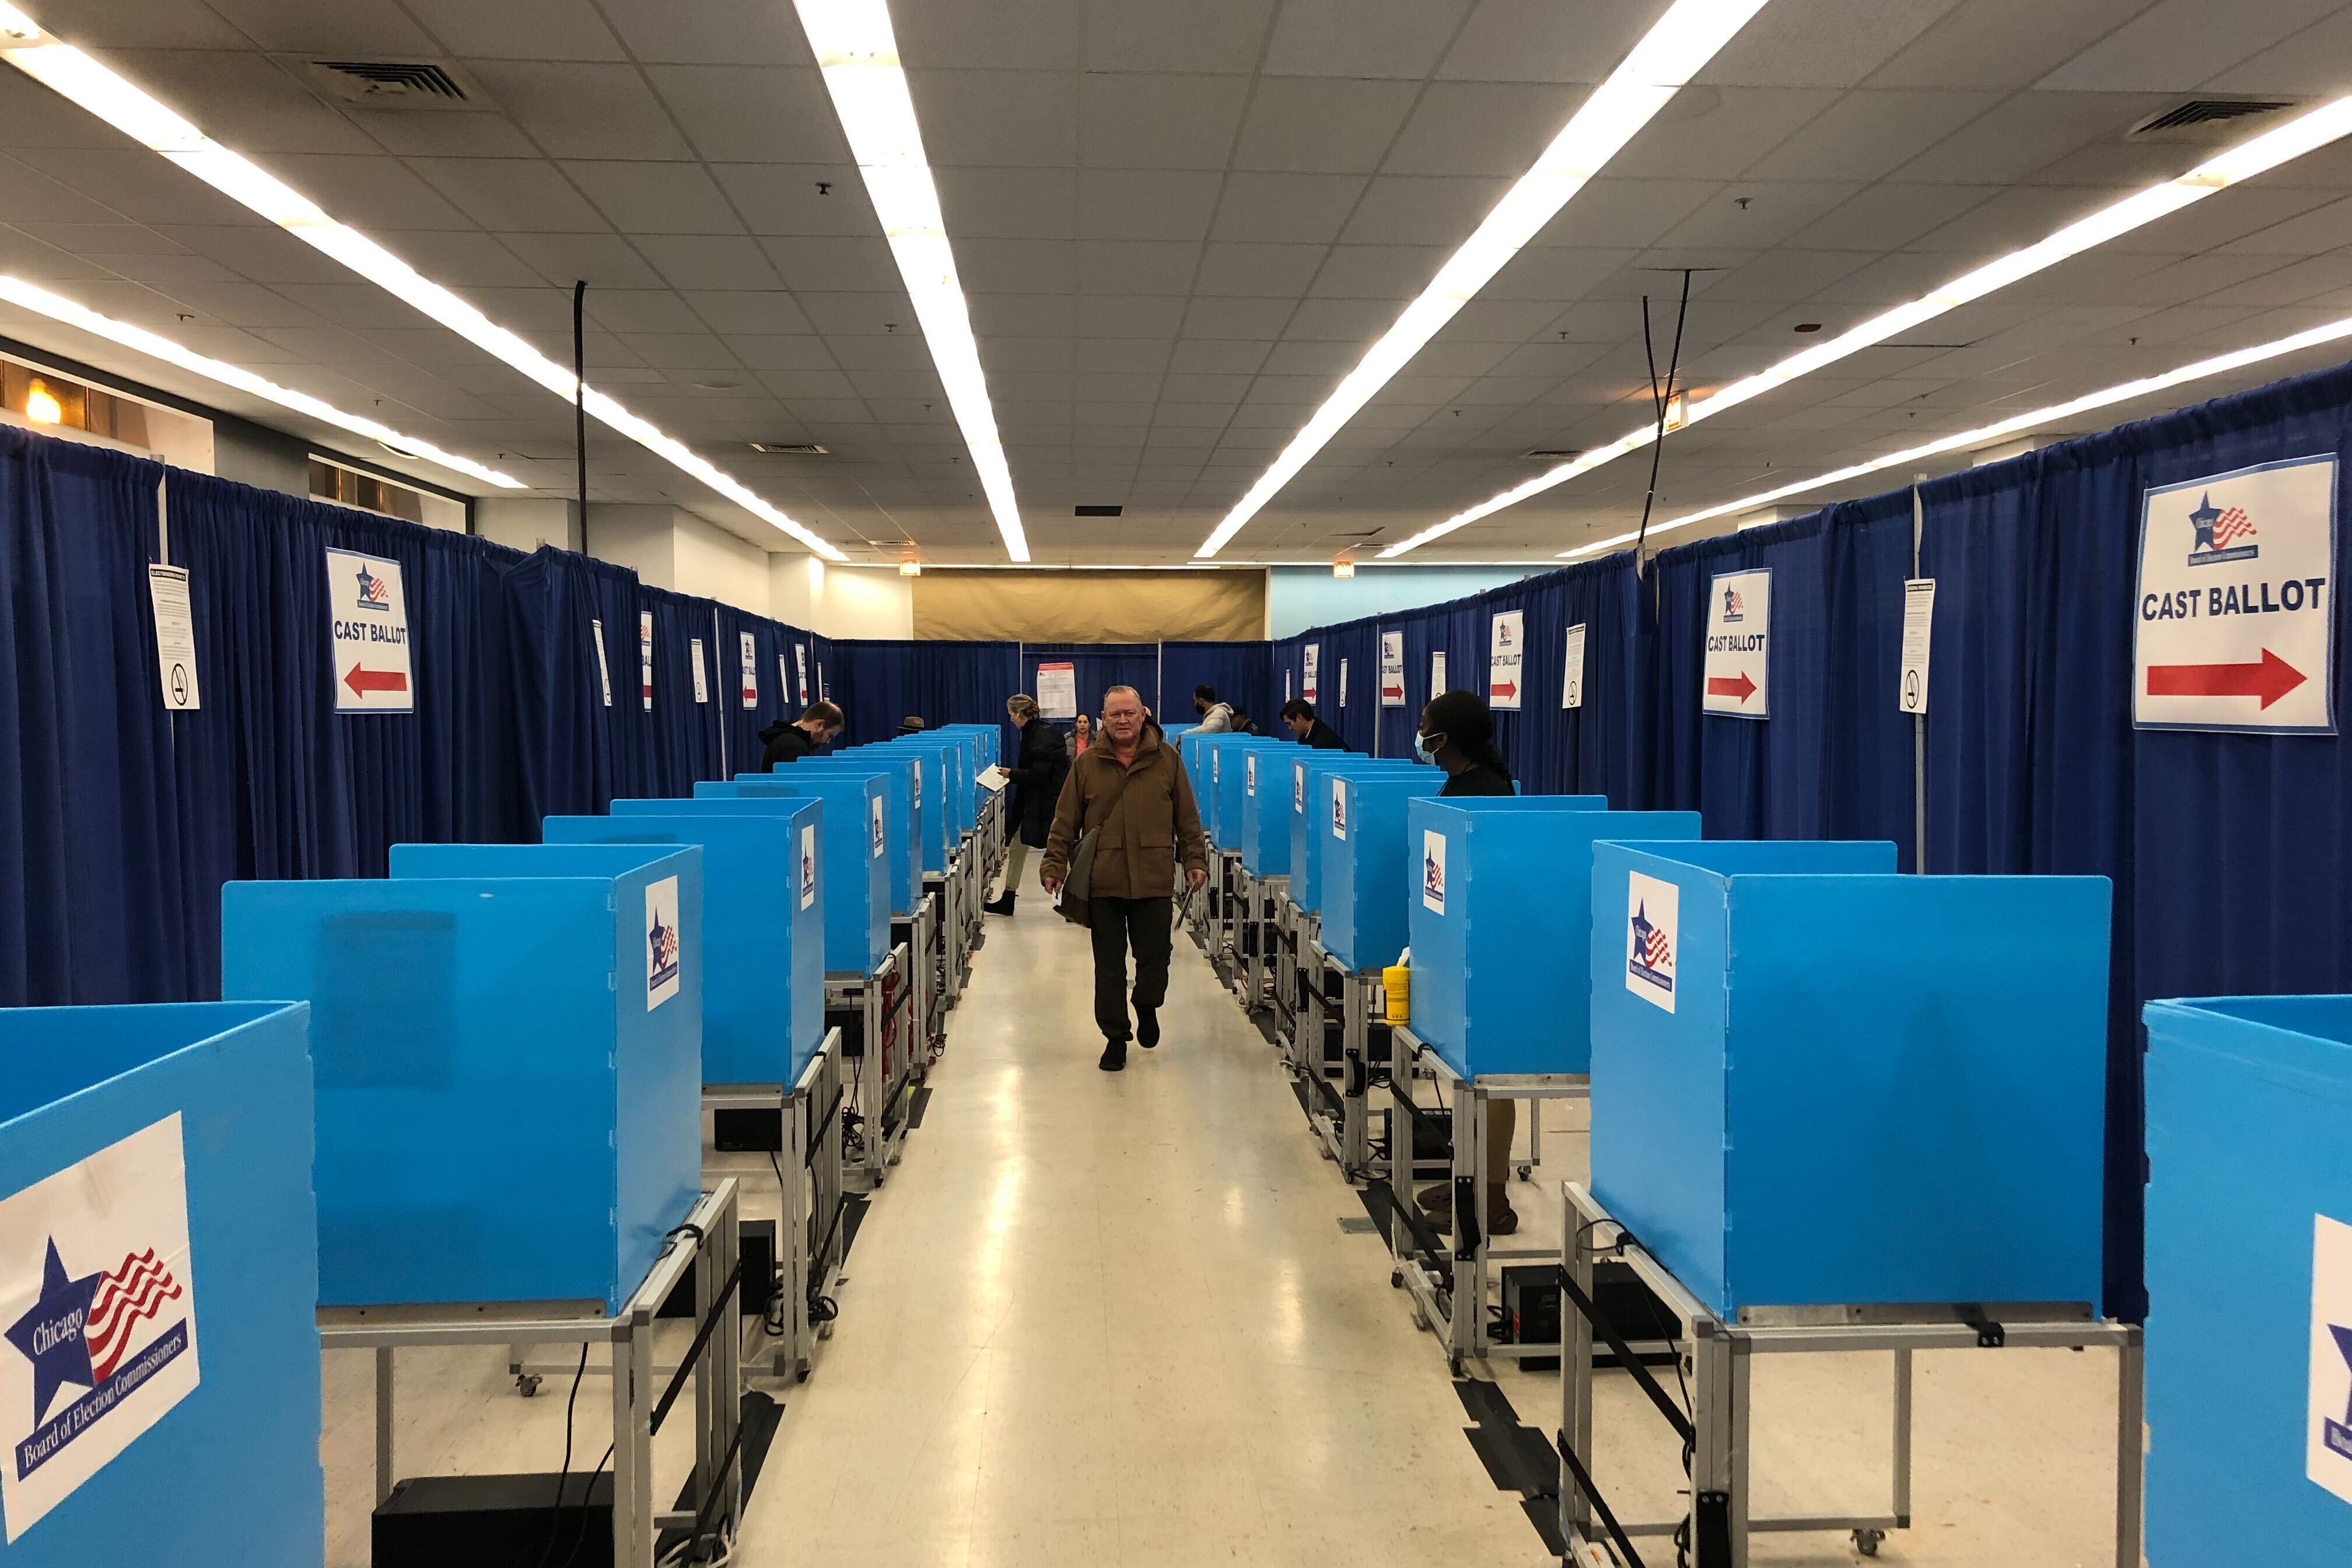 A person in a winter coat walks down a hallway of blue voting separators in a room.